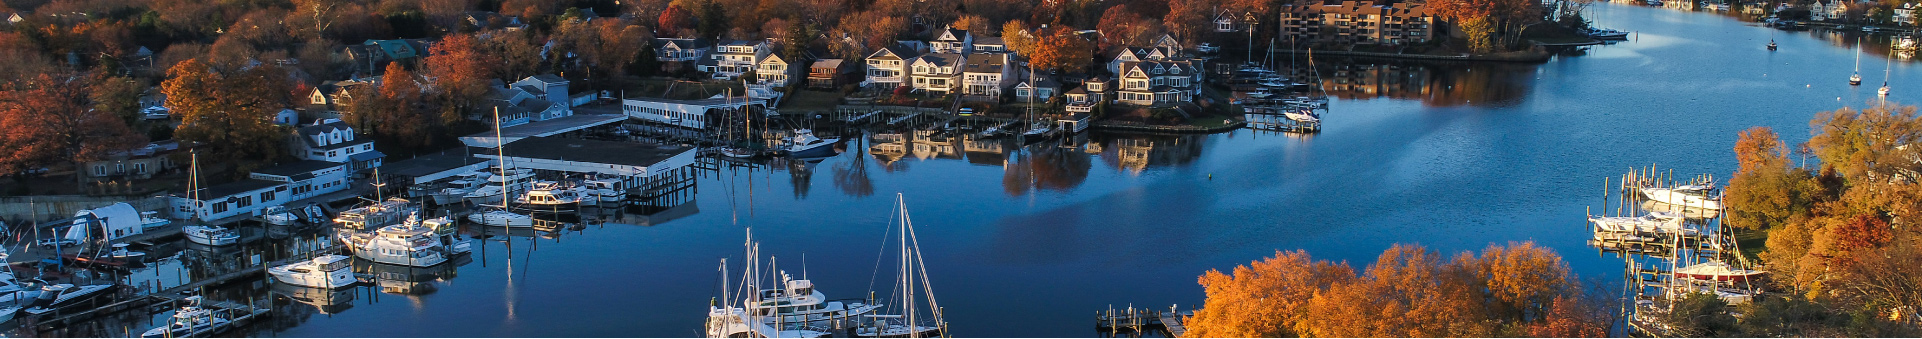 aerial view of Chesapeake Bay in autumn